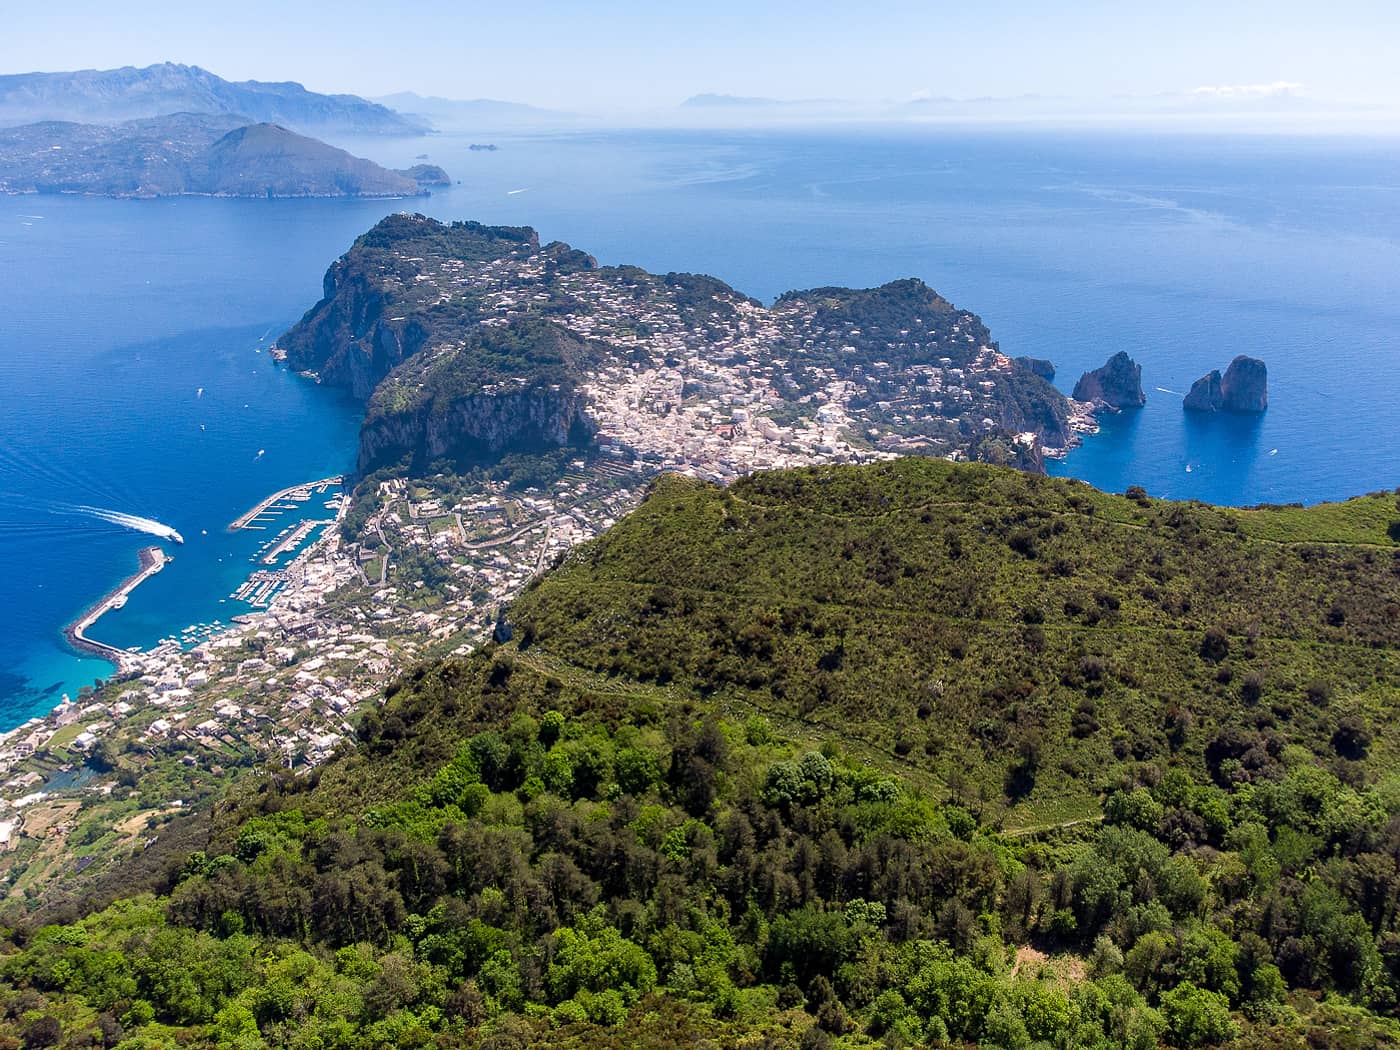 Capri or Anacapri? Which is better for an overnight stay